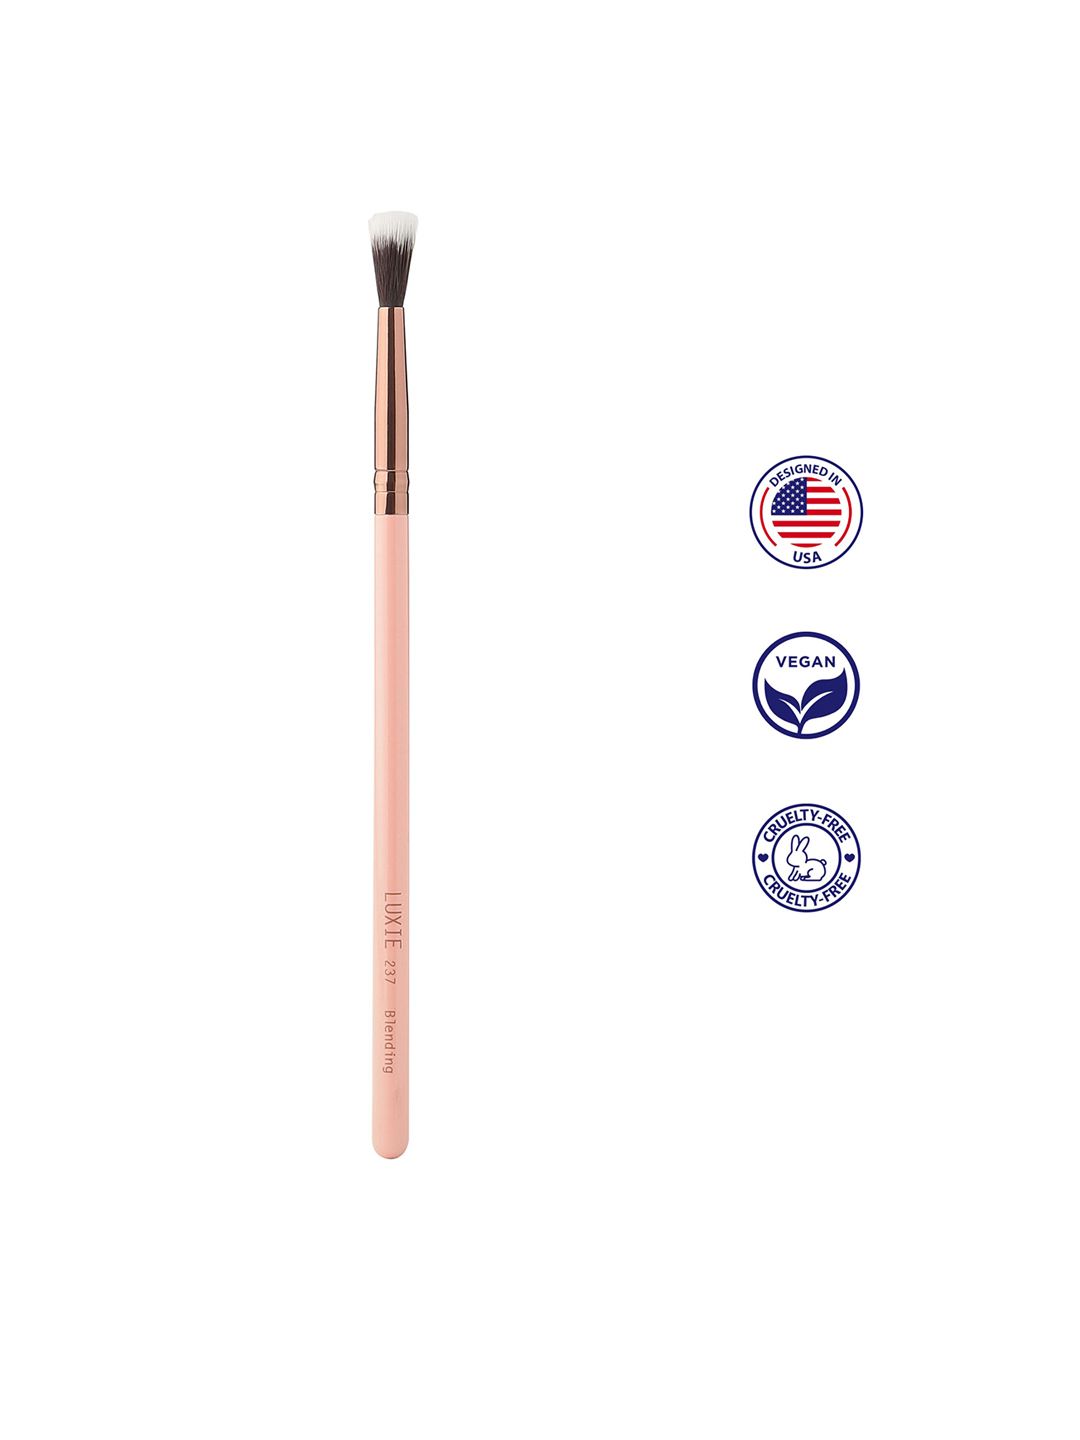 LUXIE Rose Gold Blending Brush - 237 Price in India